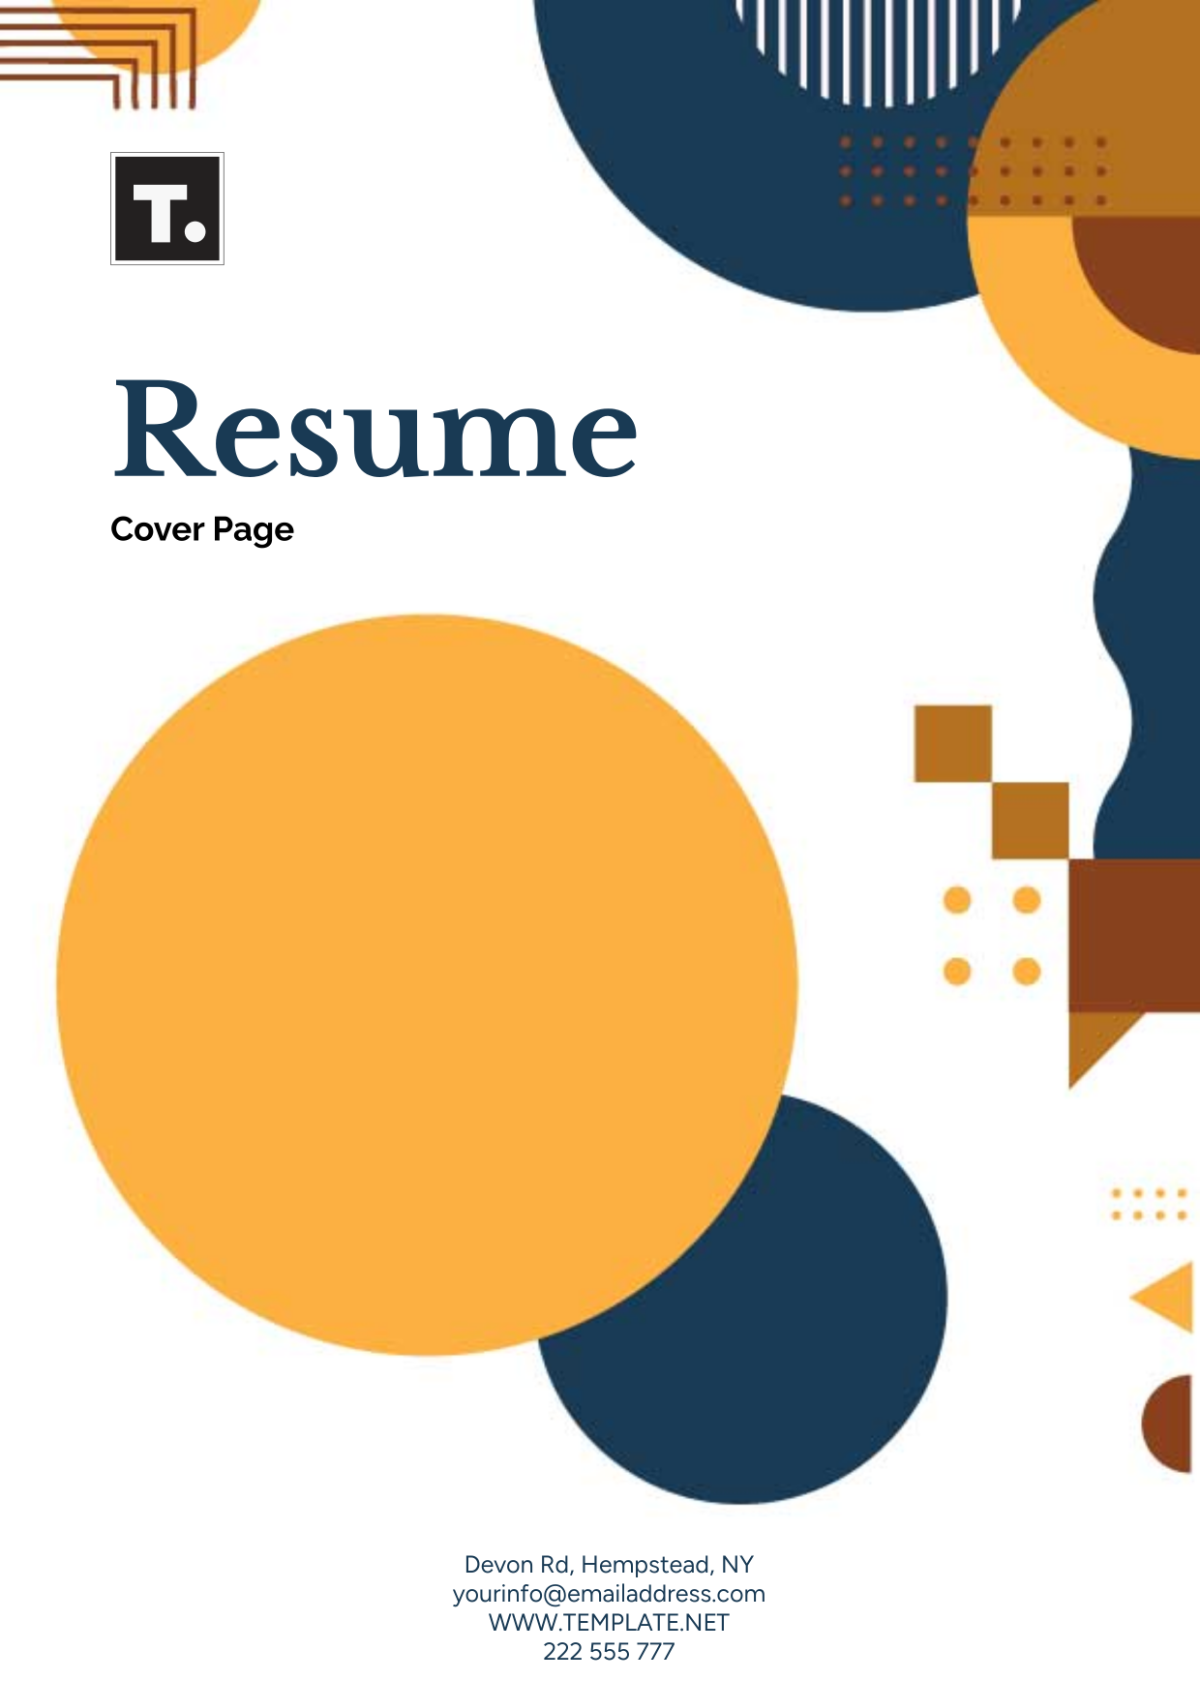 Resume Cover Page